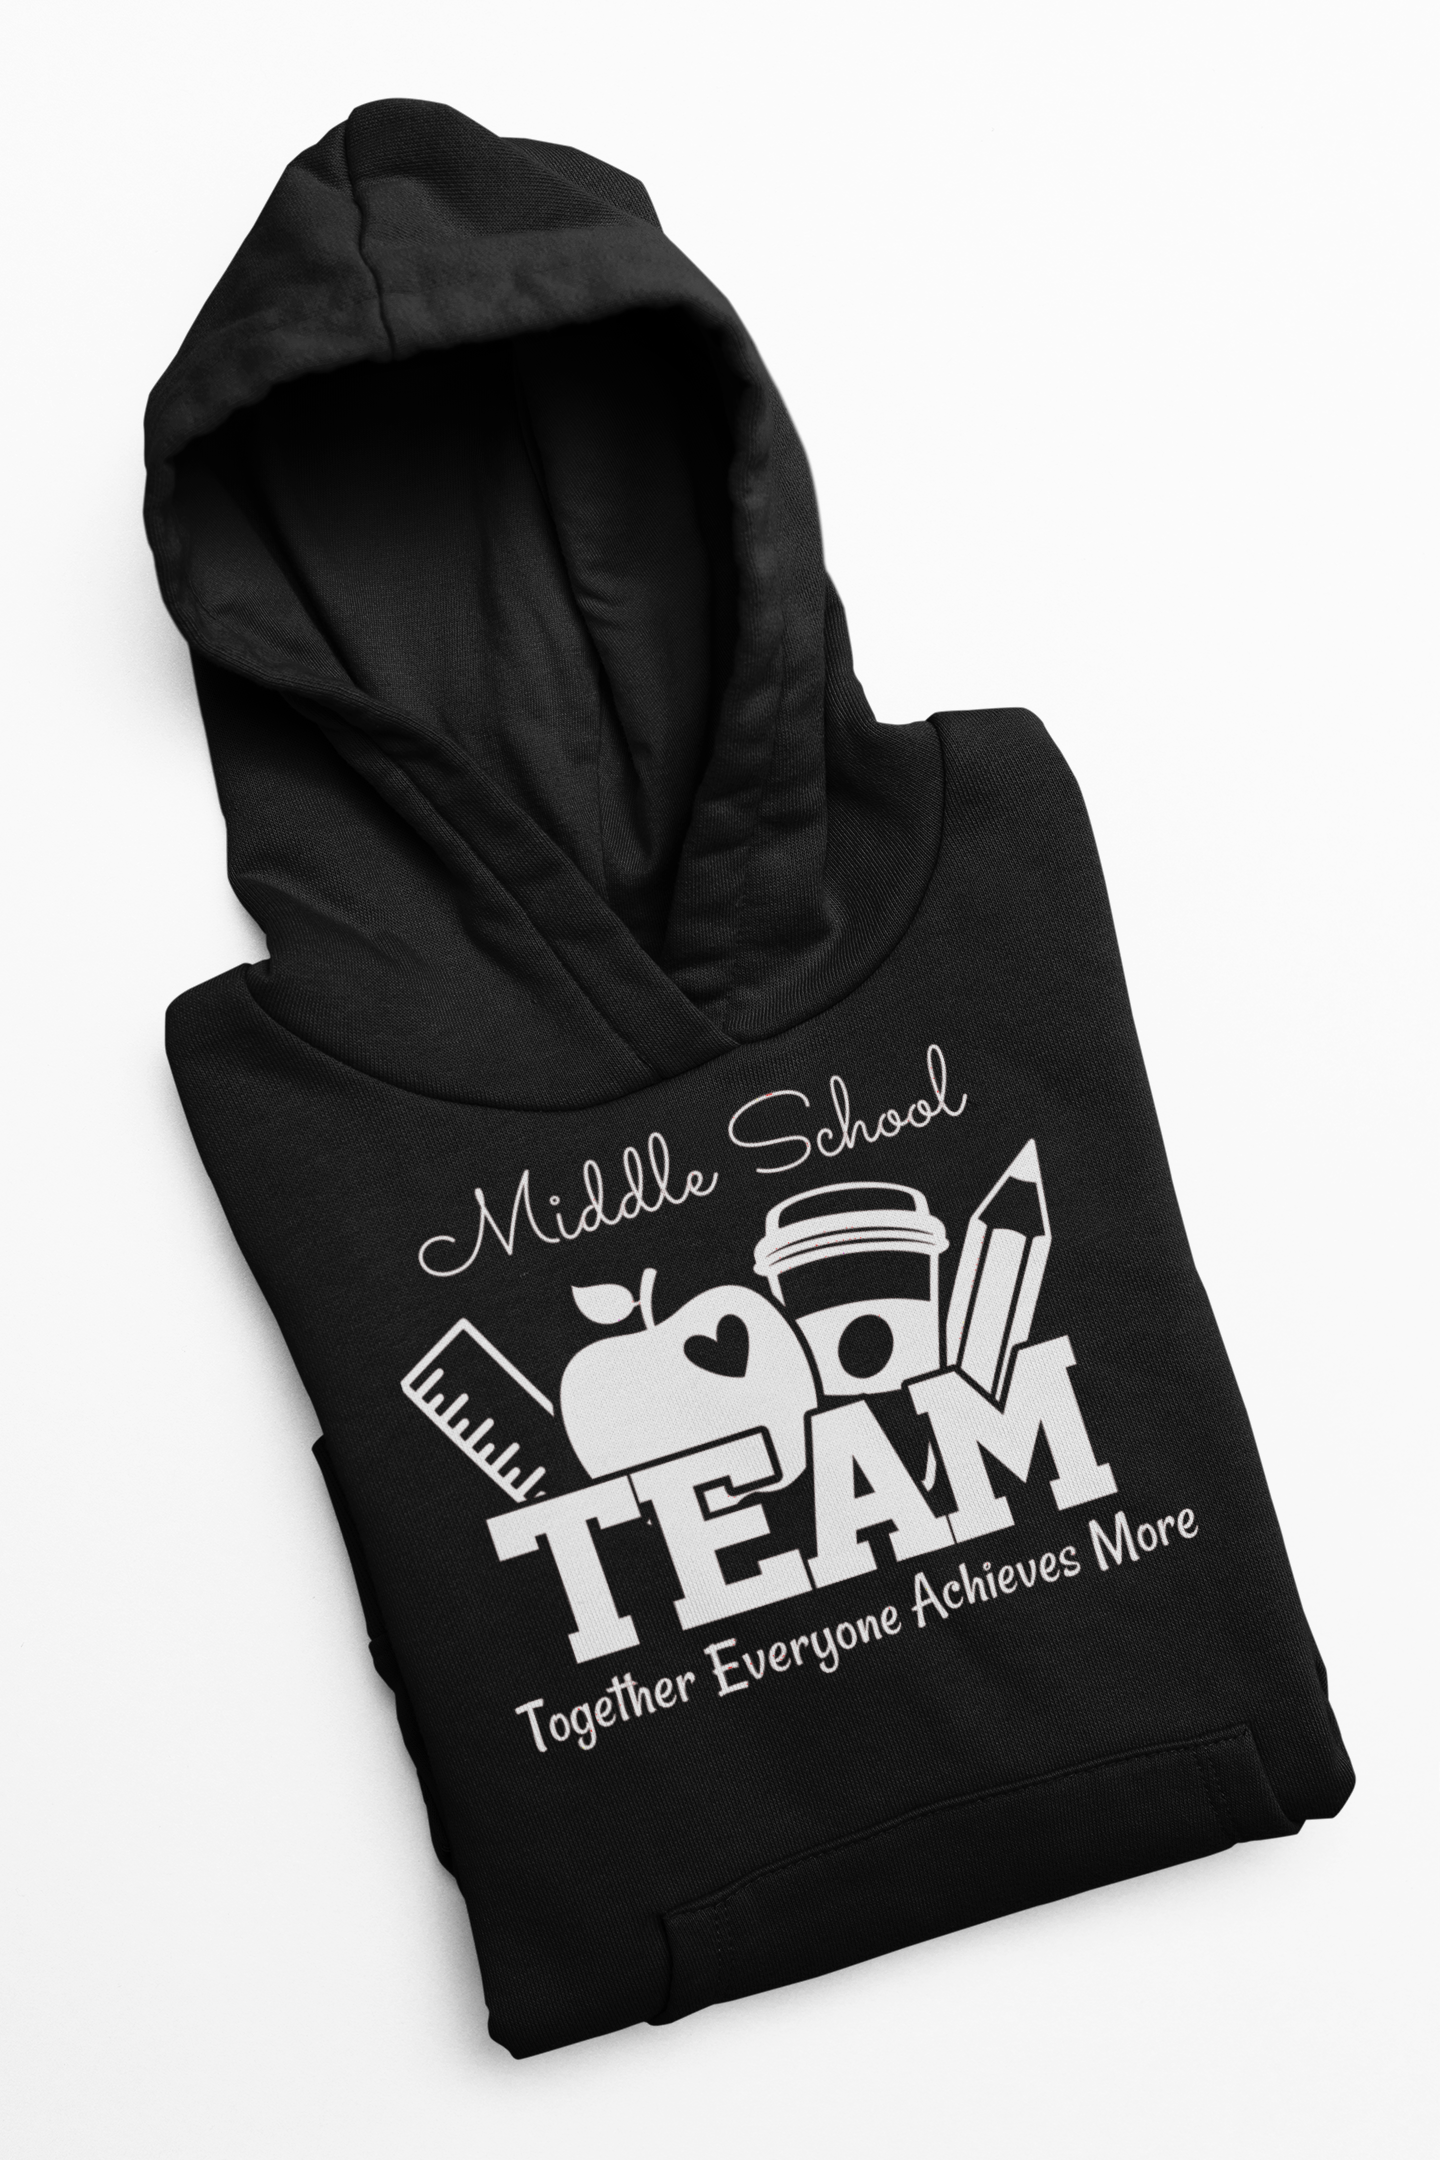 Grade Together Everyone Achieves More Graphic Hoodie